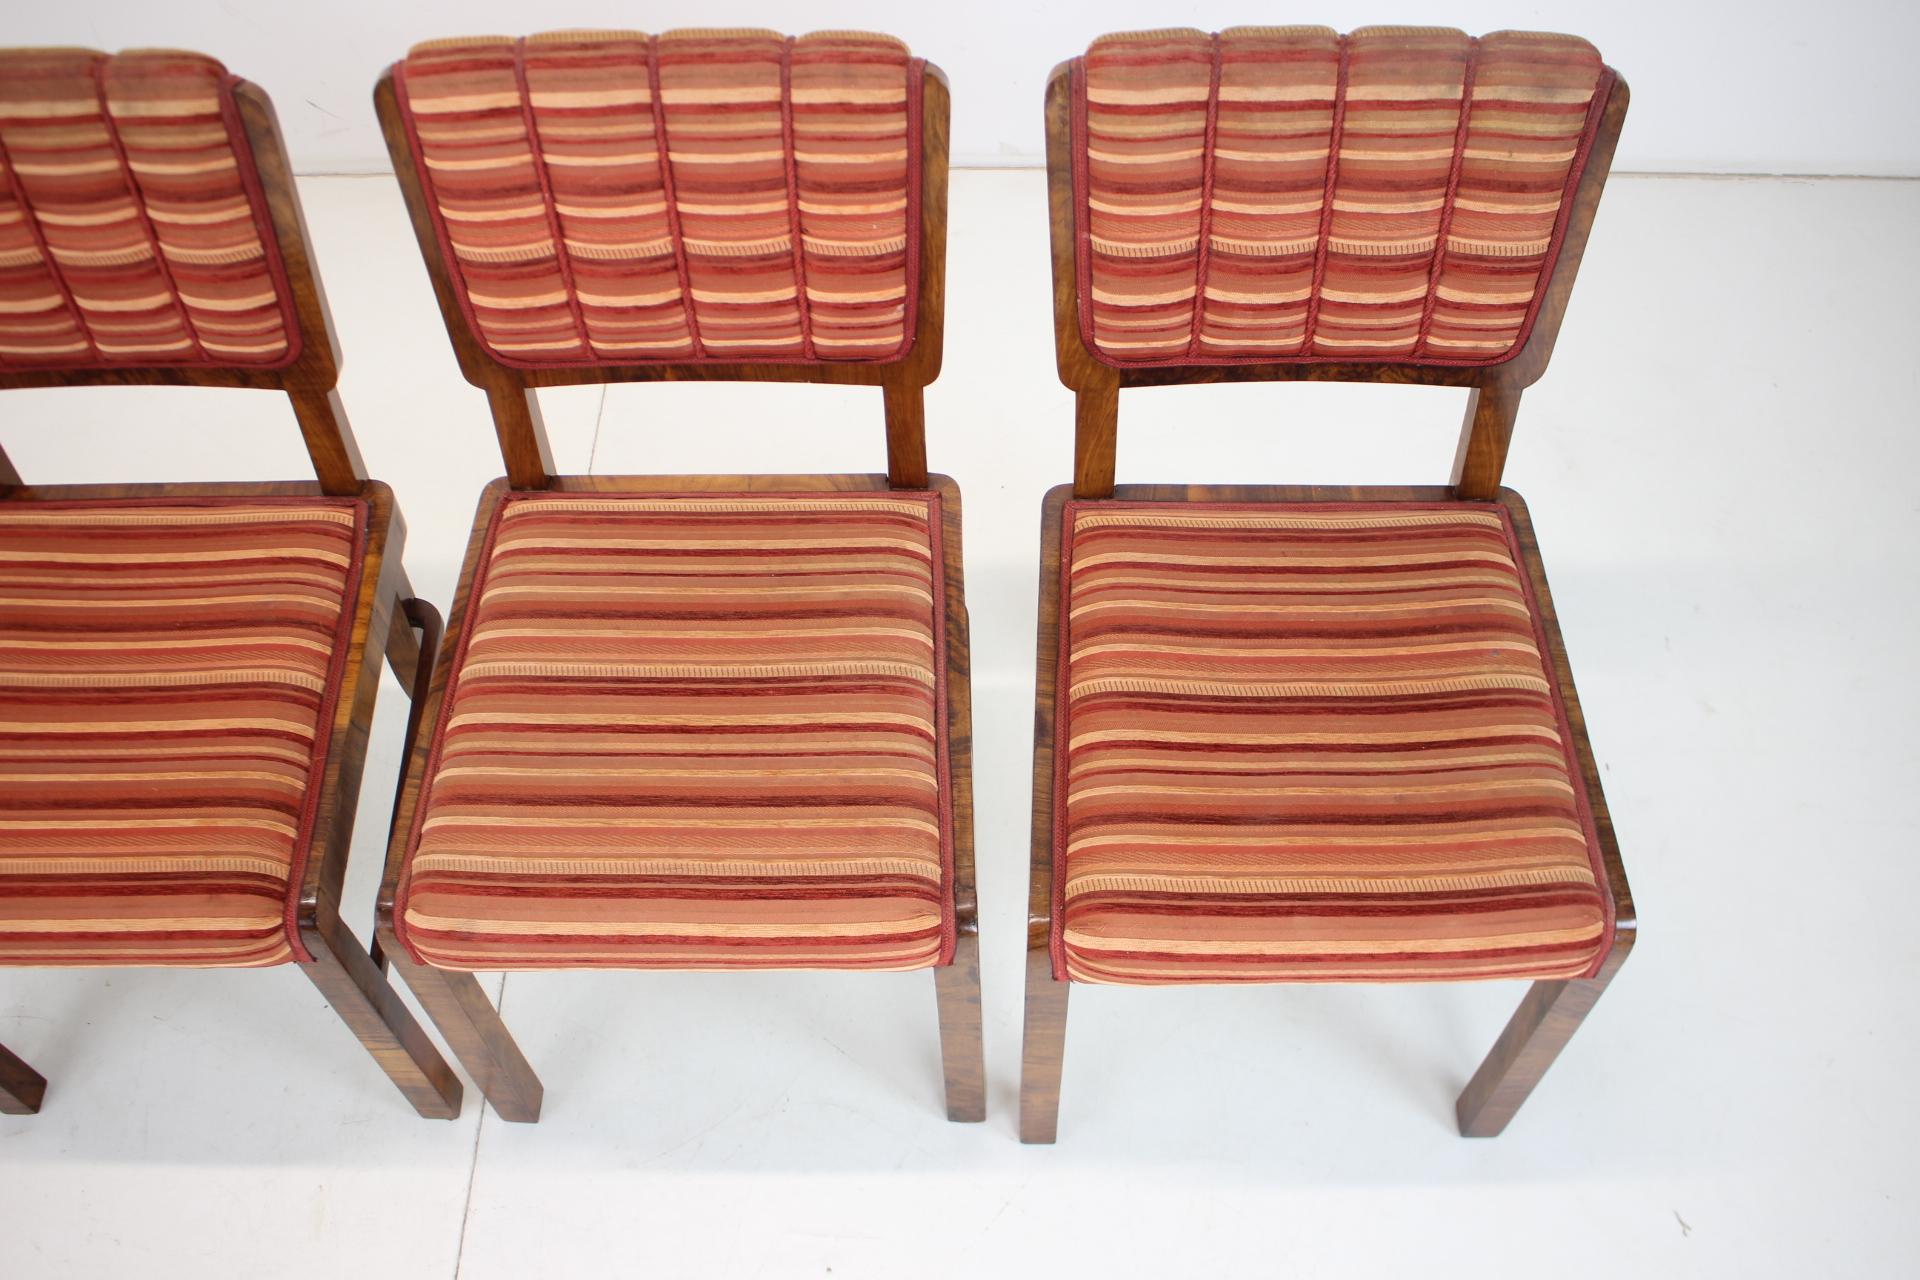 Mid-20th Century 1930s Set of 4 Art Deco Dining Chairs, Czechoslovakia For Sale